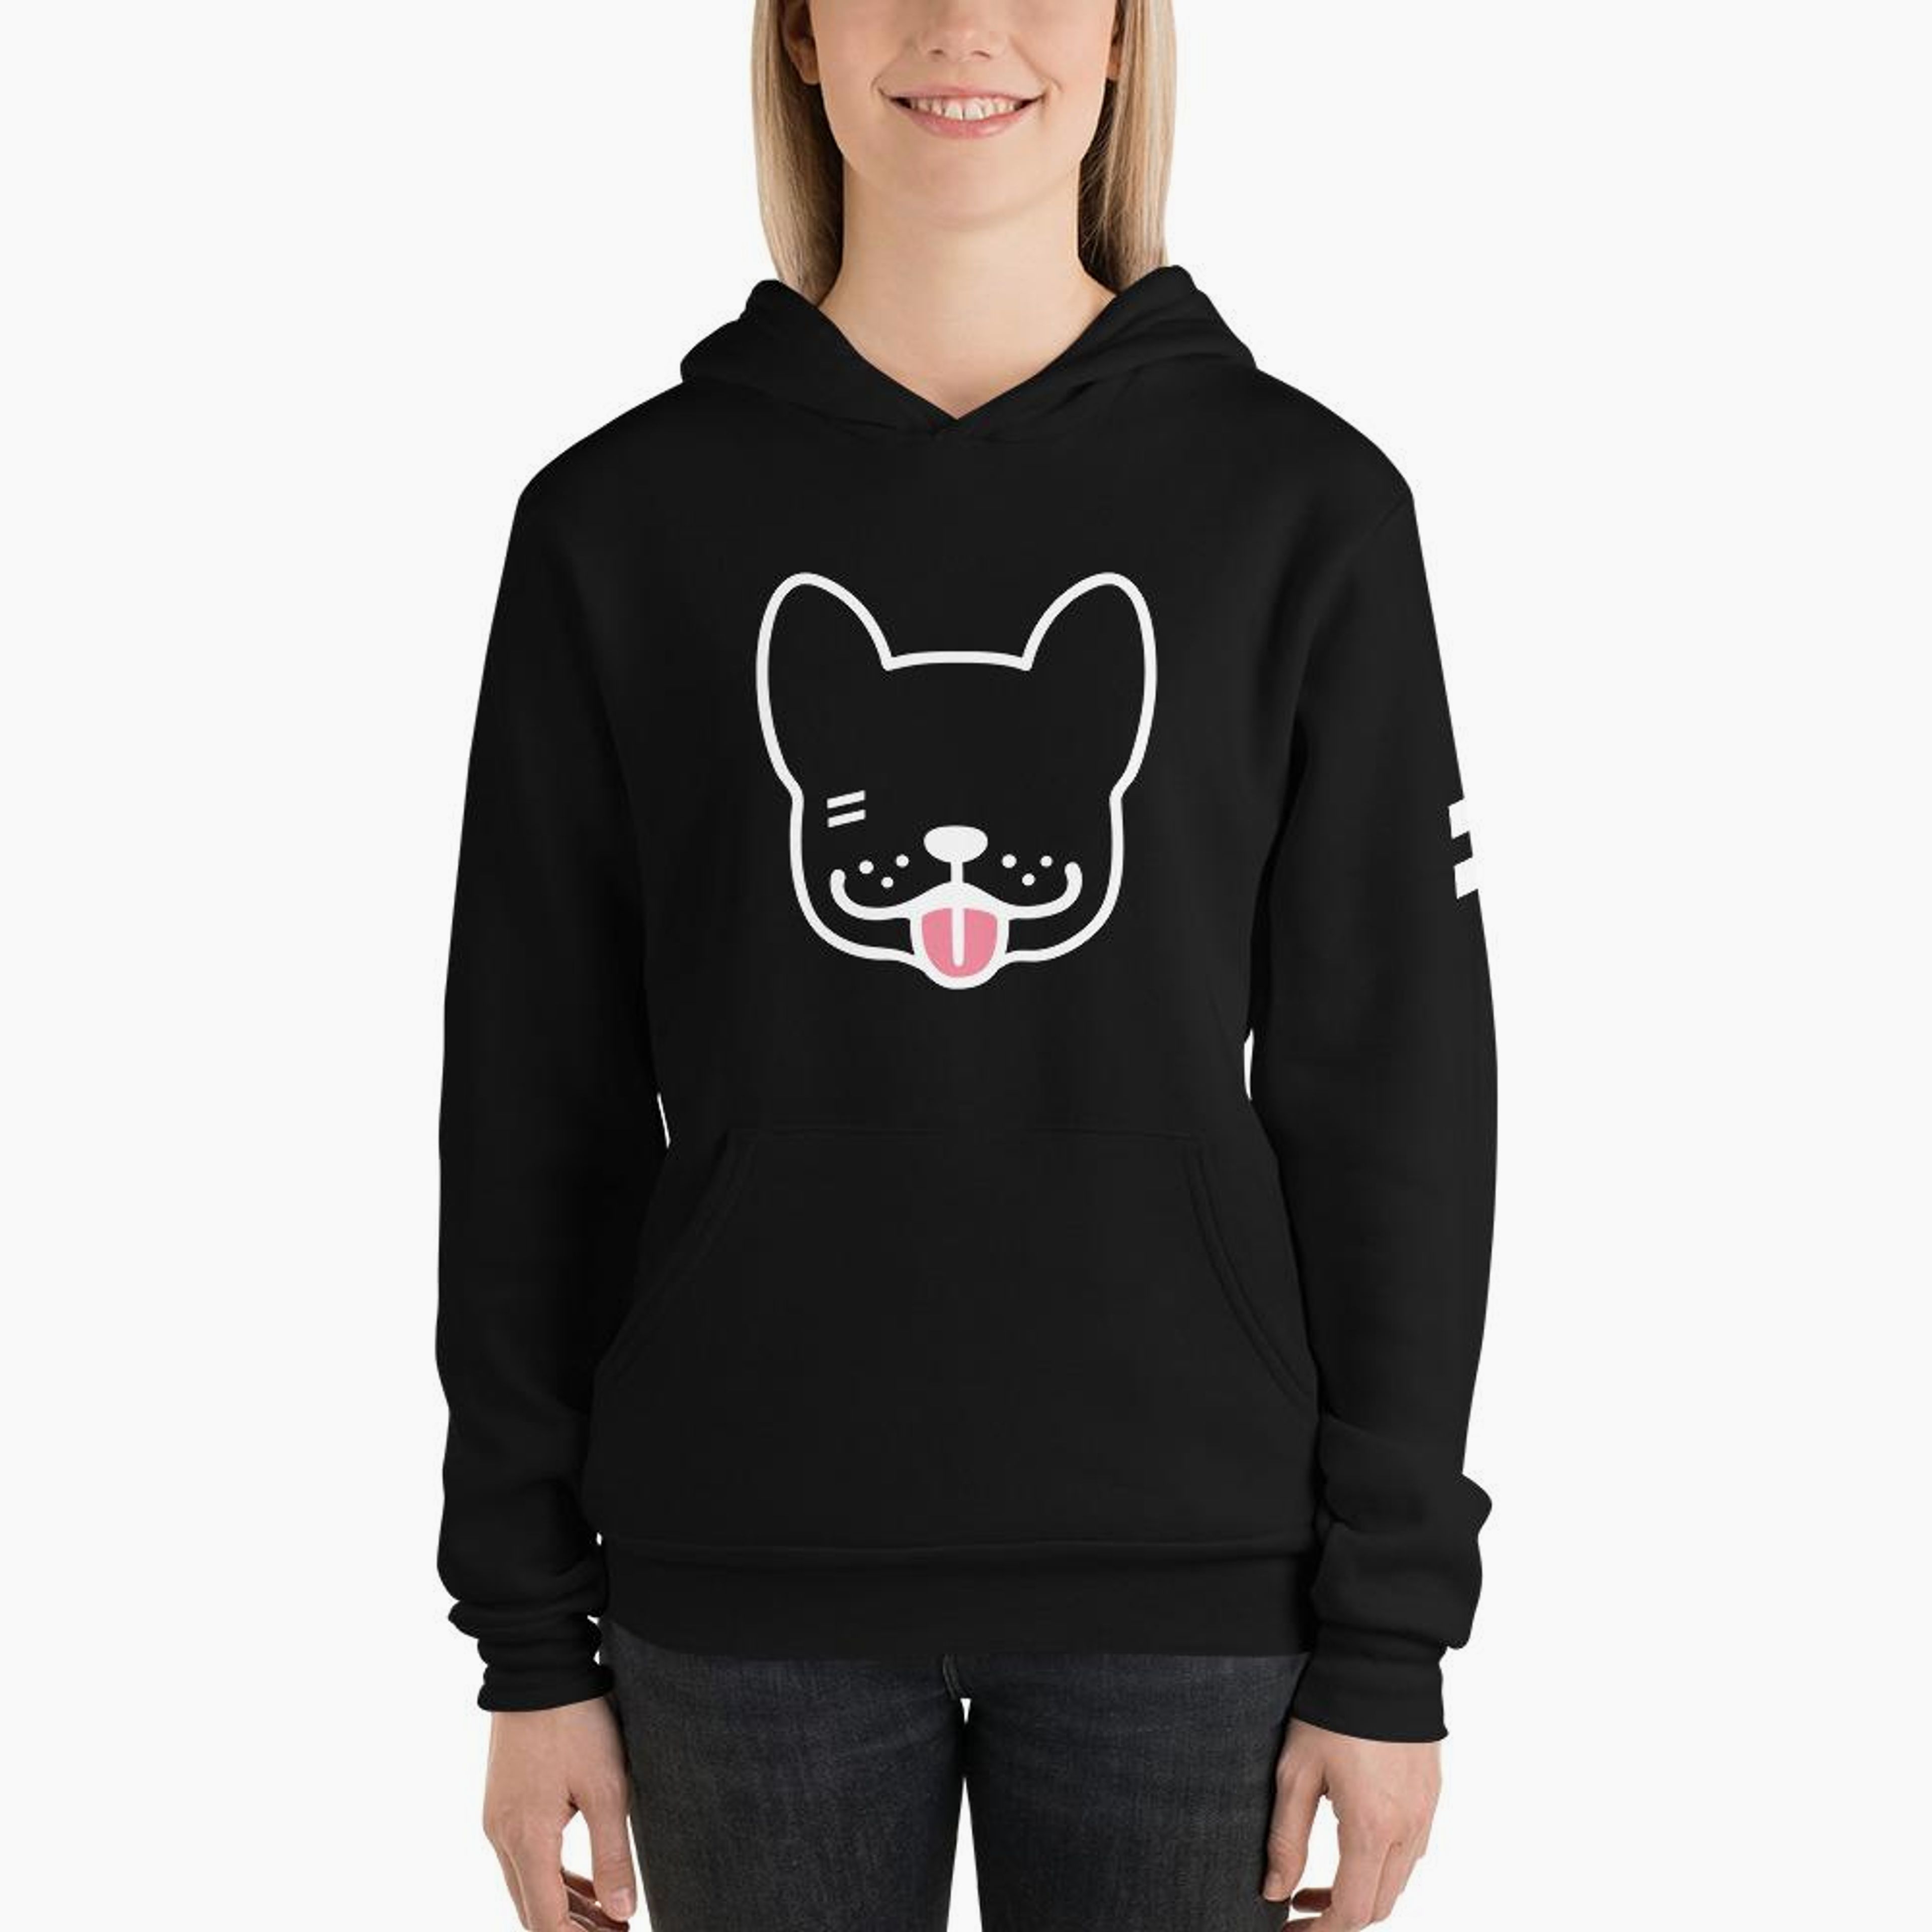 Tongue Out - Unisex hoodie